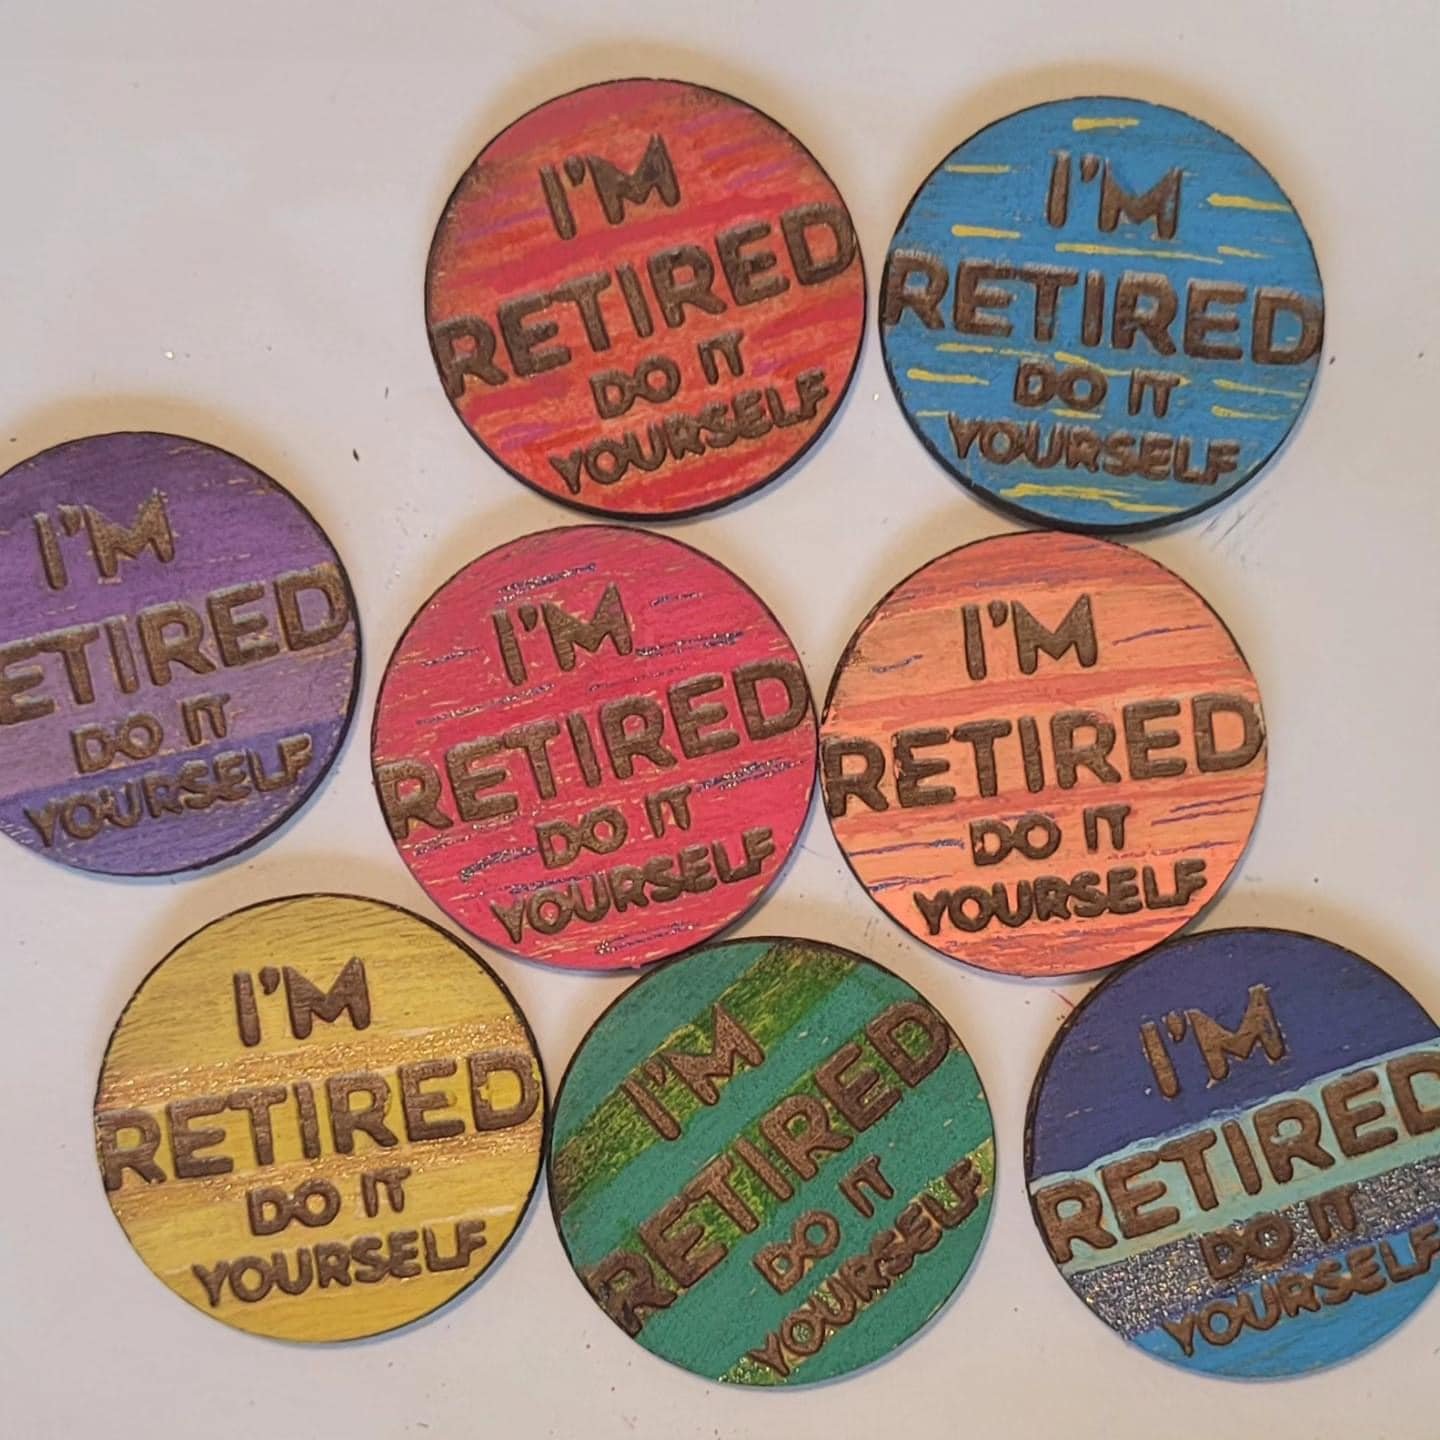 Custom Pins. Stop by today through Sunday at Absolutely Anything Essential Gift Shop and purchase or order these one of a kind keepsakes. PJ Style Designs